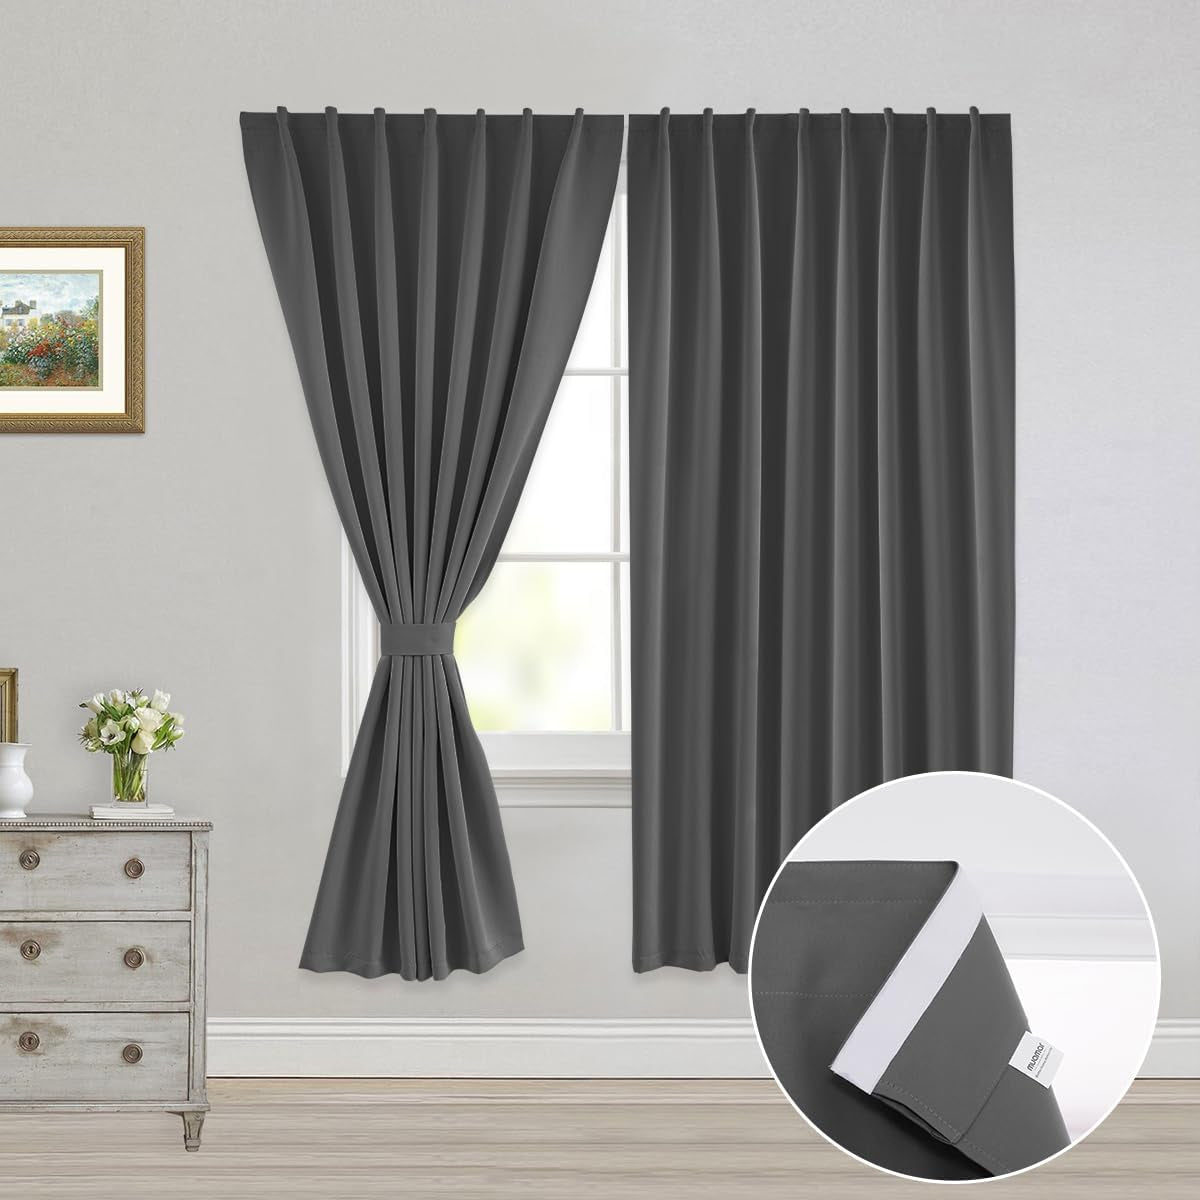 Muamar 2Pcs Blackout Curtains Privacy Curtains 63 Inch Length Window Curtains,Easy Install Thermal Insulated Window Shades,Stick Curtains No Rods, Black 42" W X 63" L  Muamar Grey 52"W X 63"L 